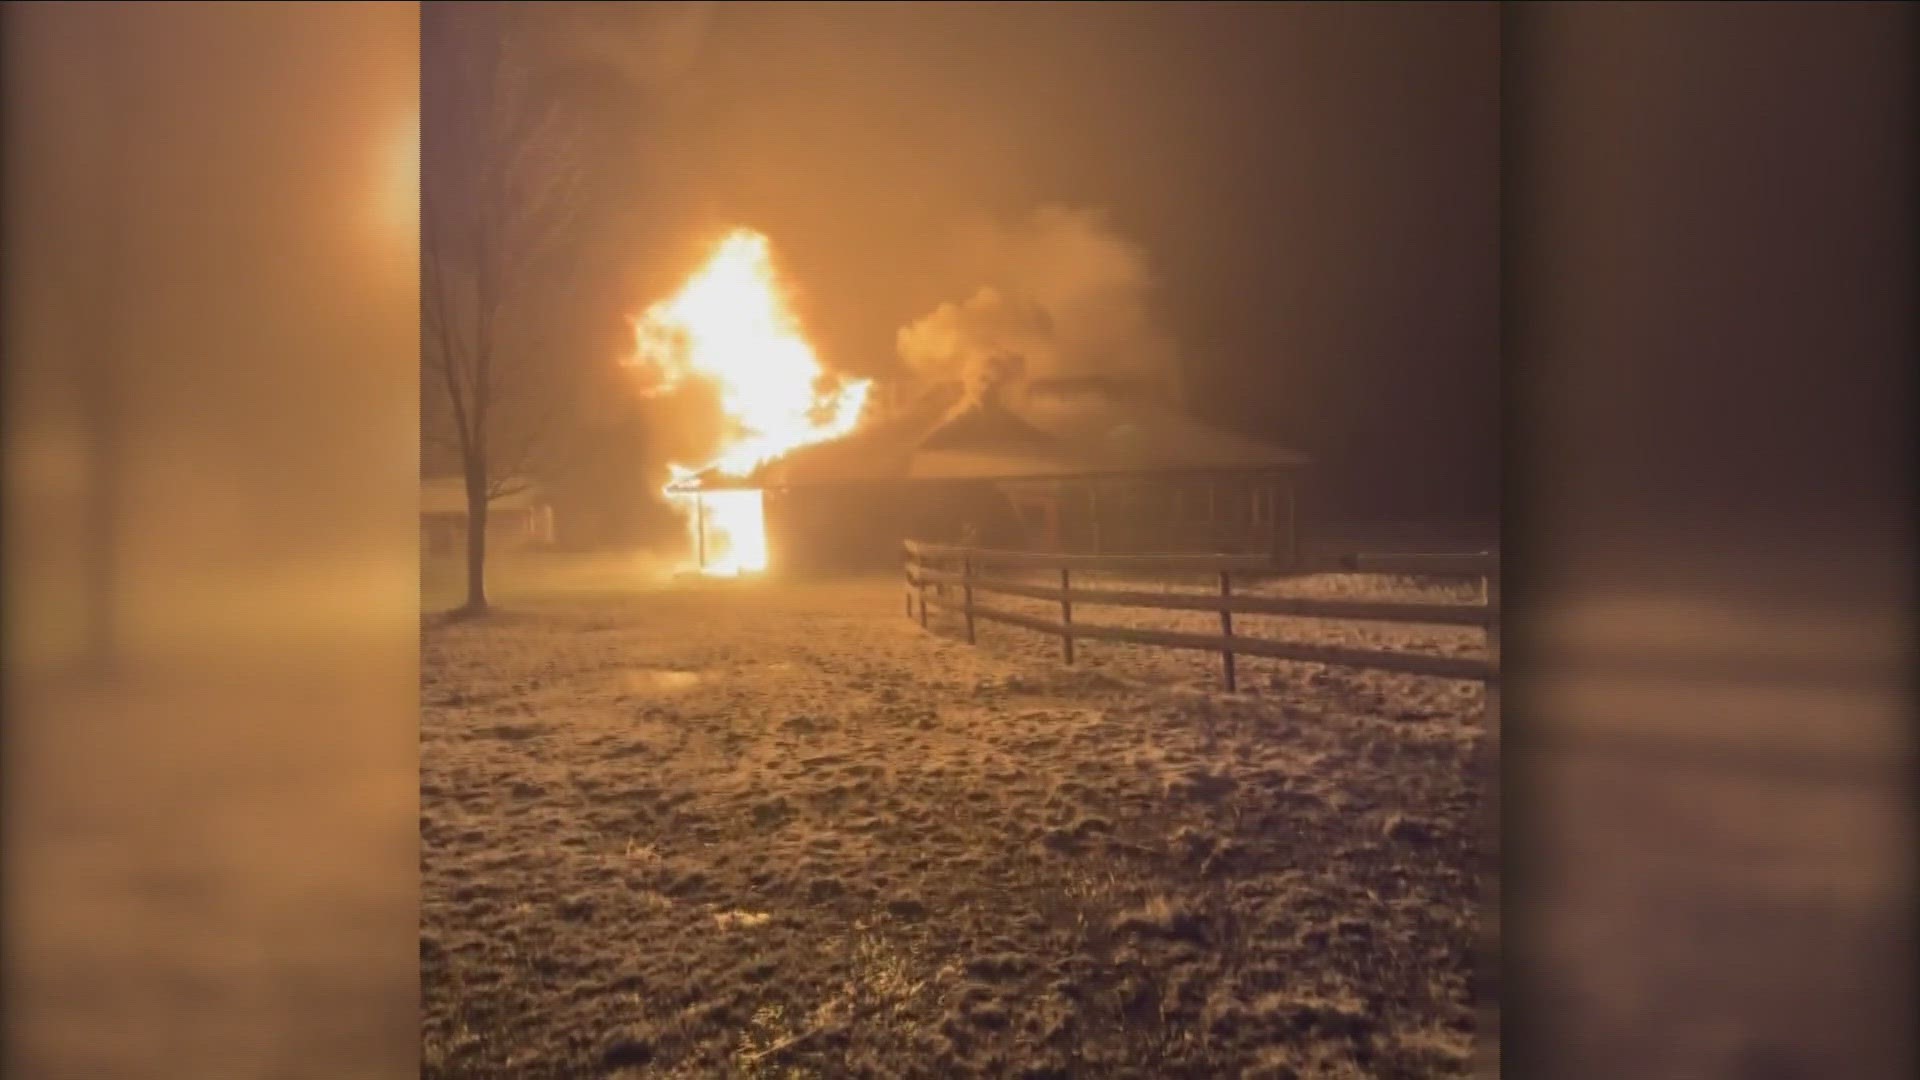 Stillwater farm goes up in flames